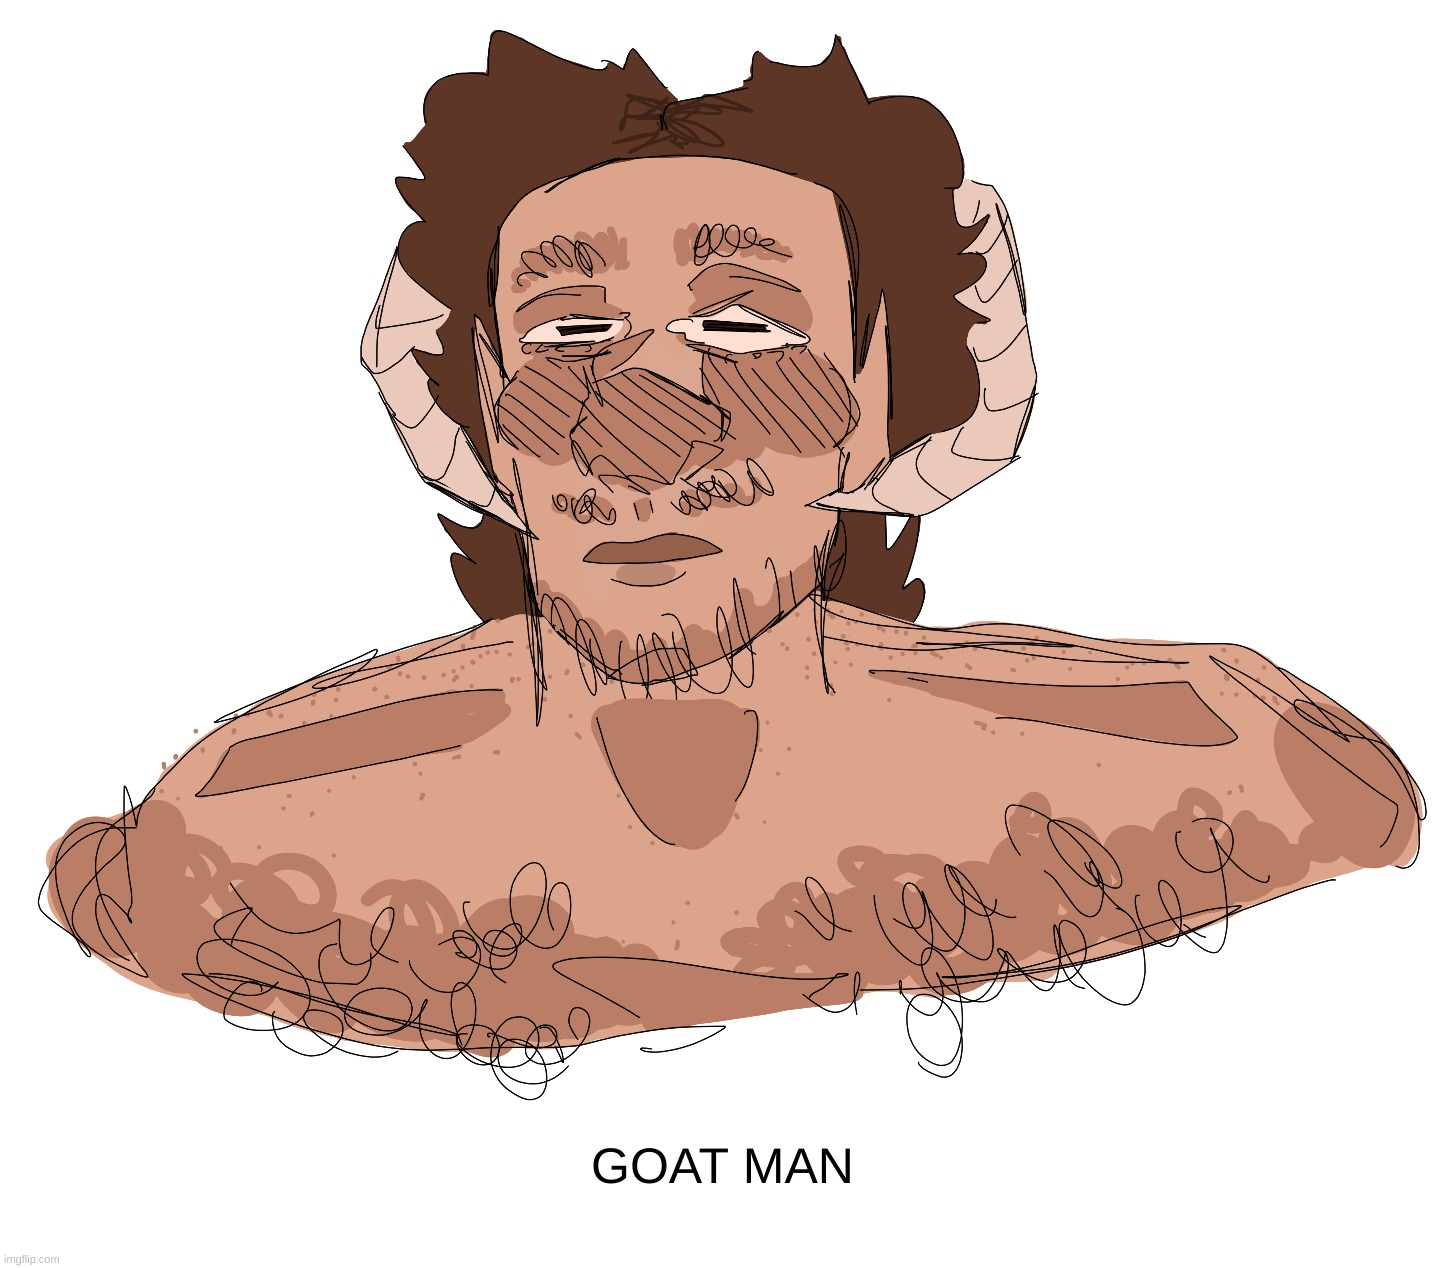 his name is Larry | GOAT MAN | made w/ Imgflip meme maker